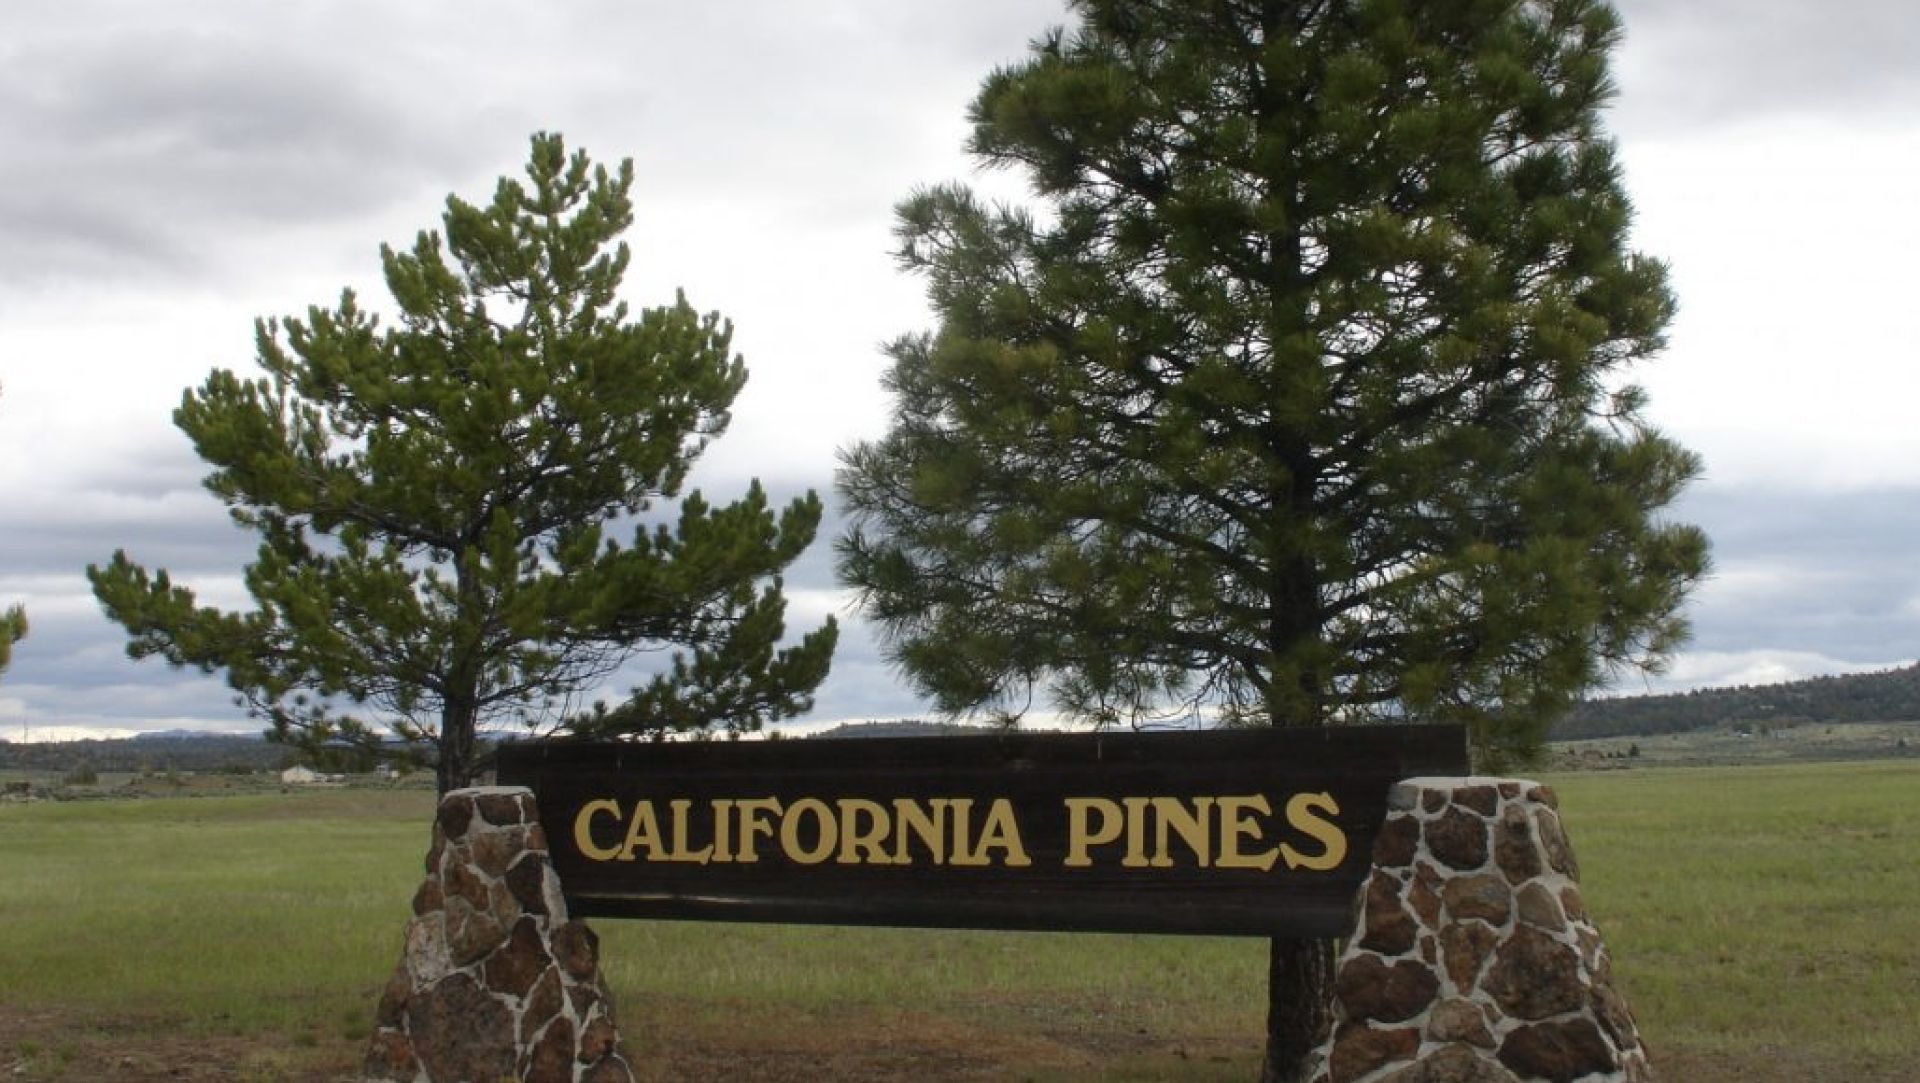 Build Your Home on an Acre of Peaceful California Pines! - Image 12 of 18